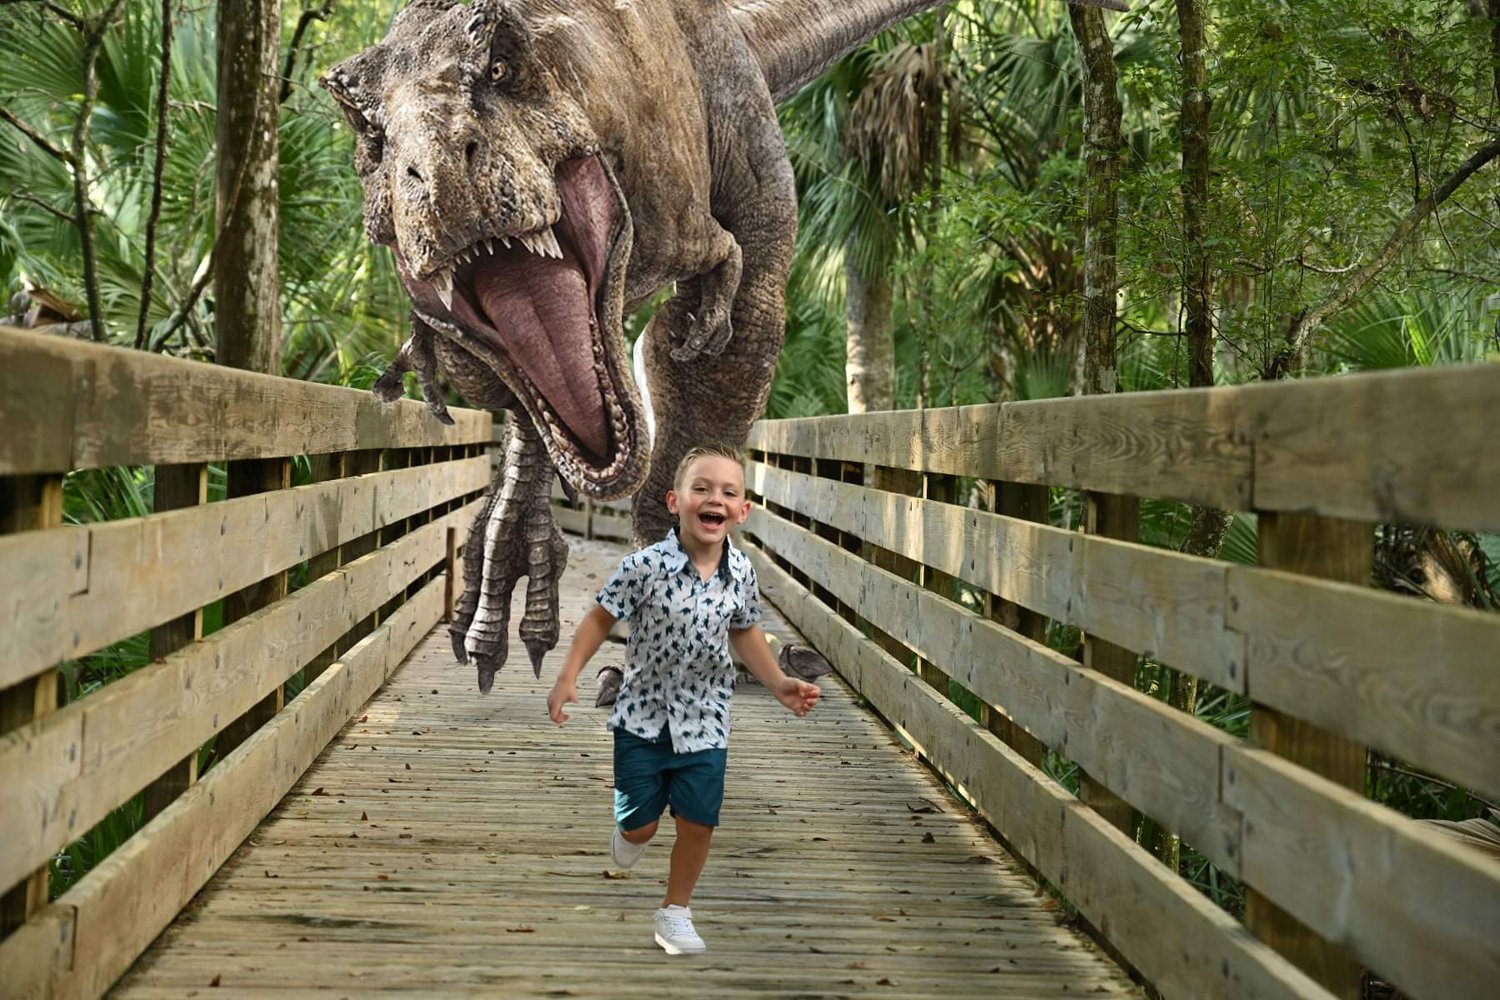 Image of T-rex chase